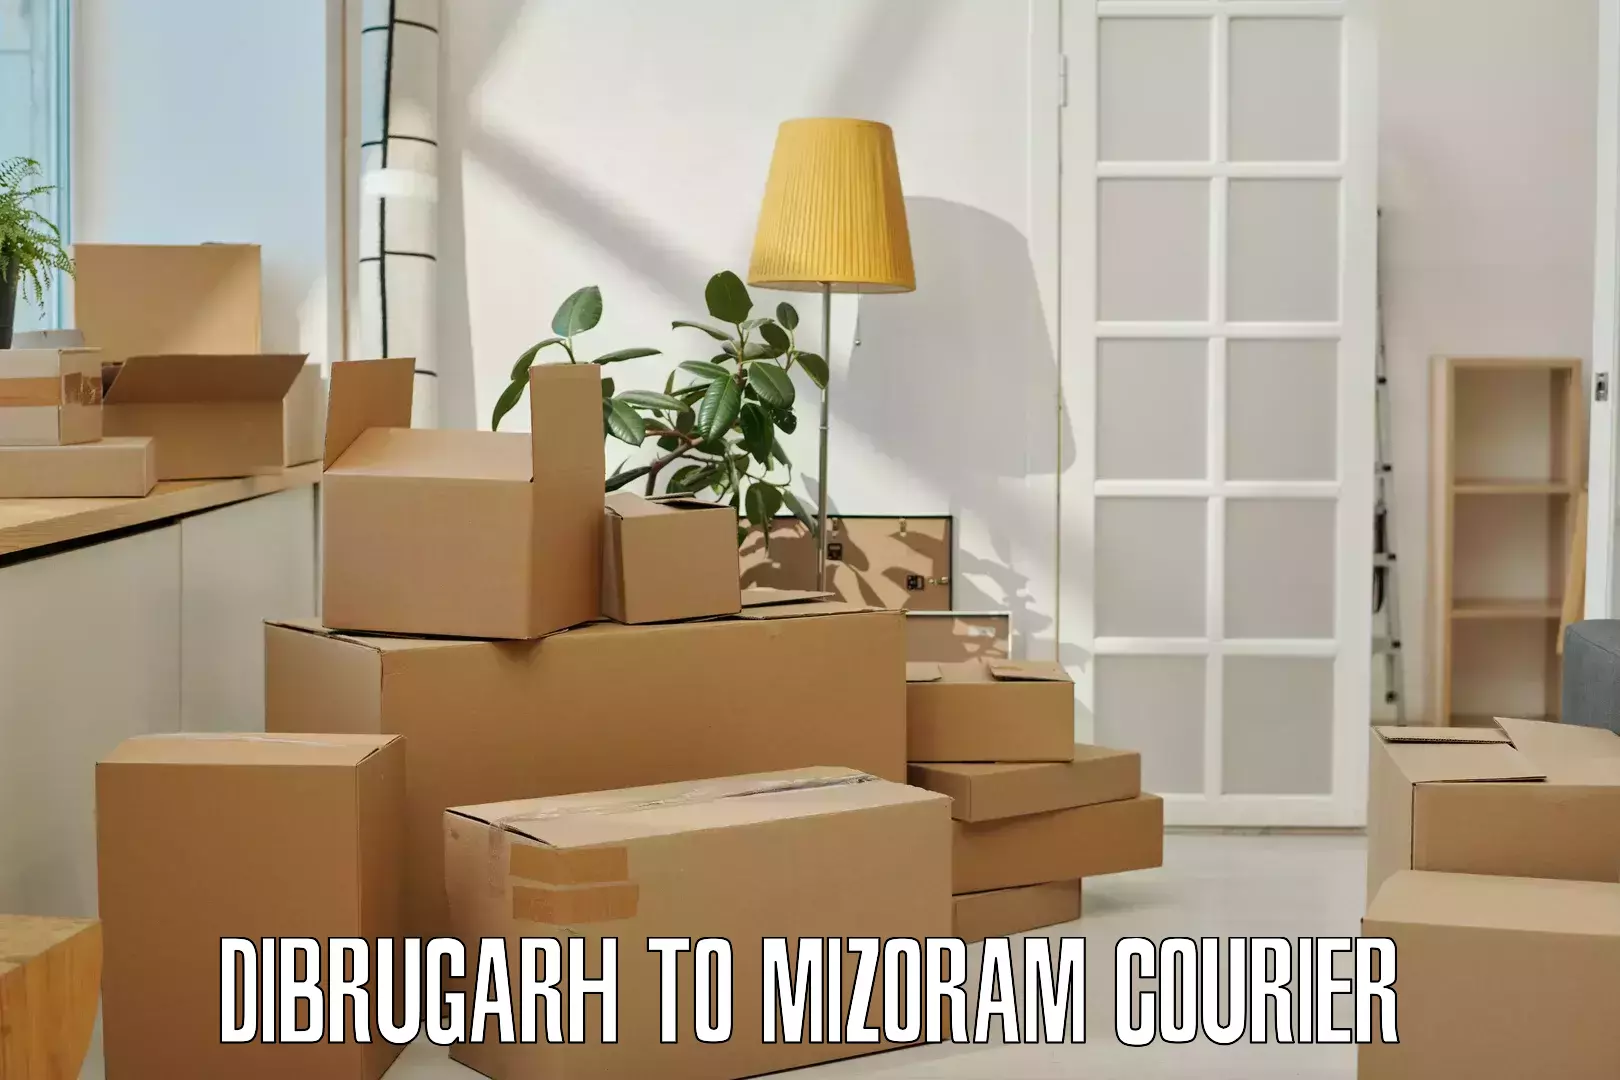 Express package services Dibrugarh to Mizoram